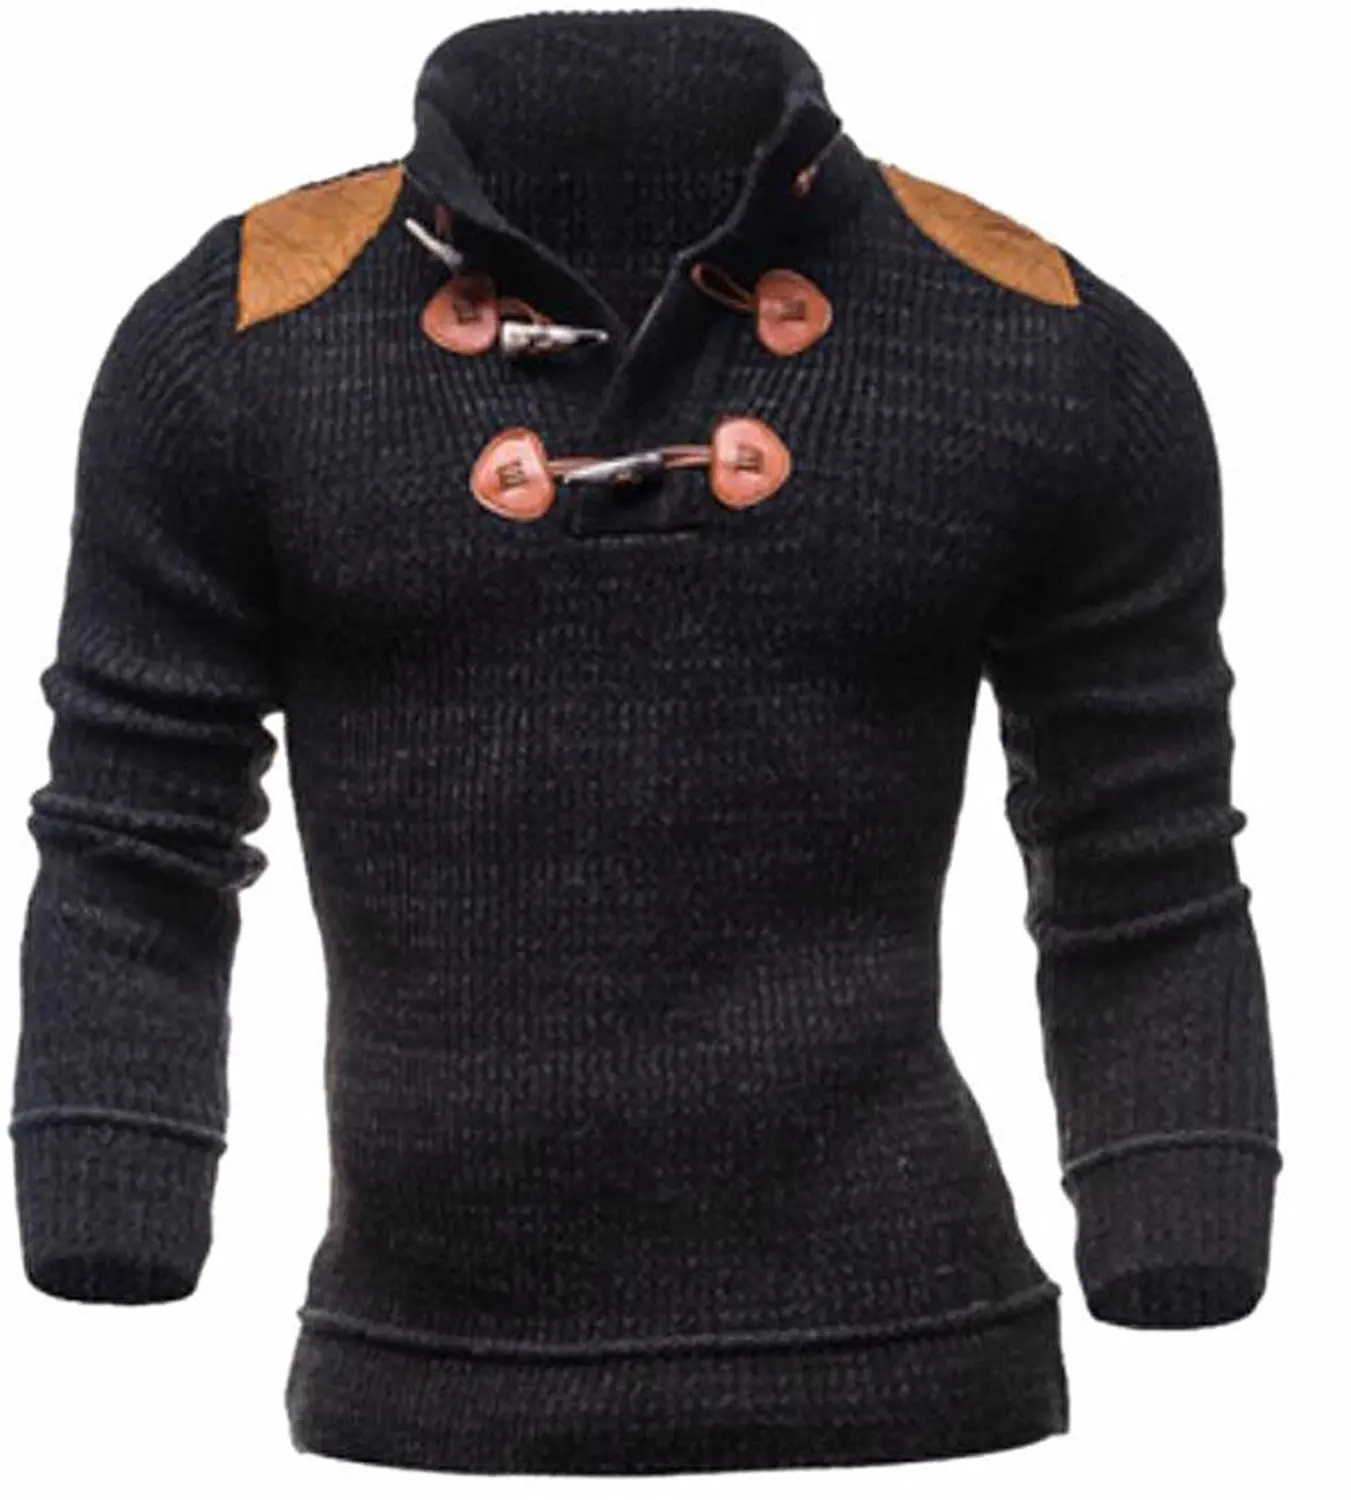 CBTLVSN Men Crew Neck Long Sleeve Slim Knitted Pullover Casual Sweater